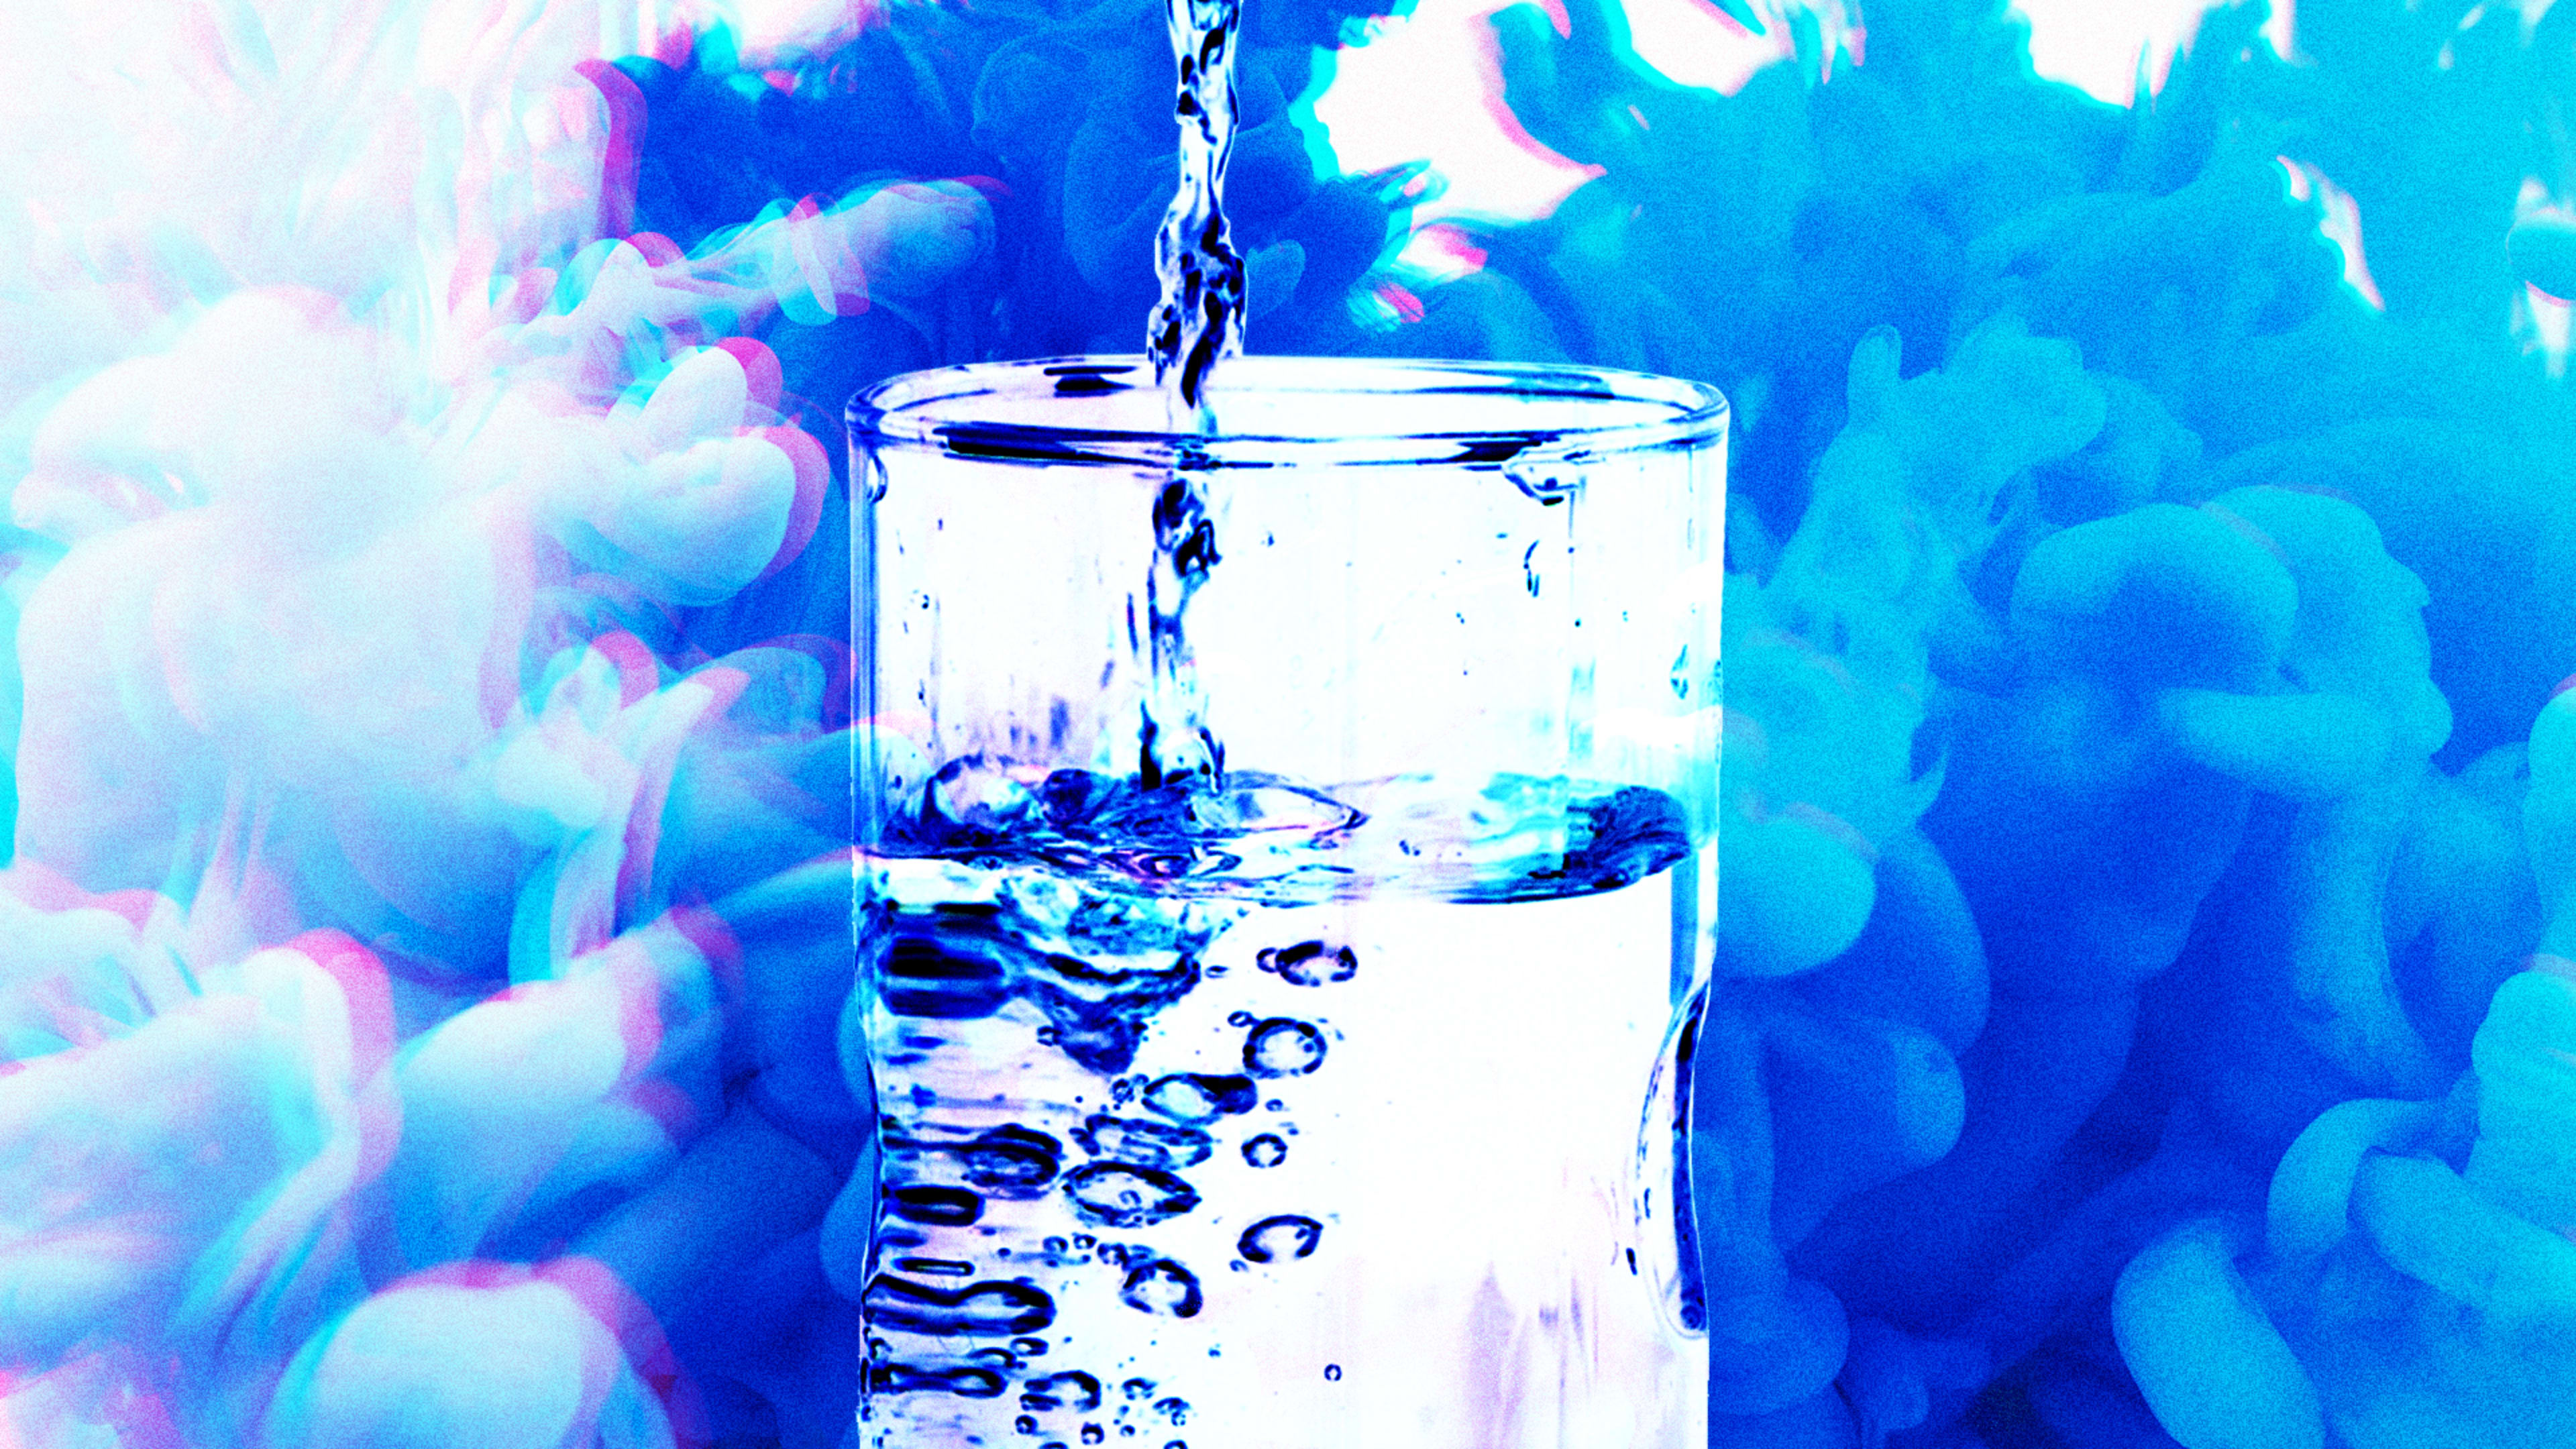 What is WaterTok? The controversial flavored water trend that’s blowing up on TikTok